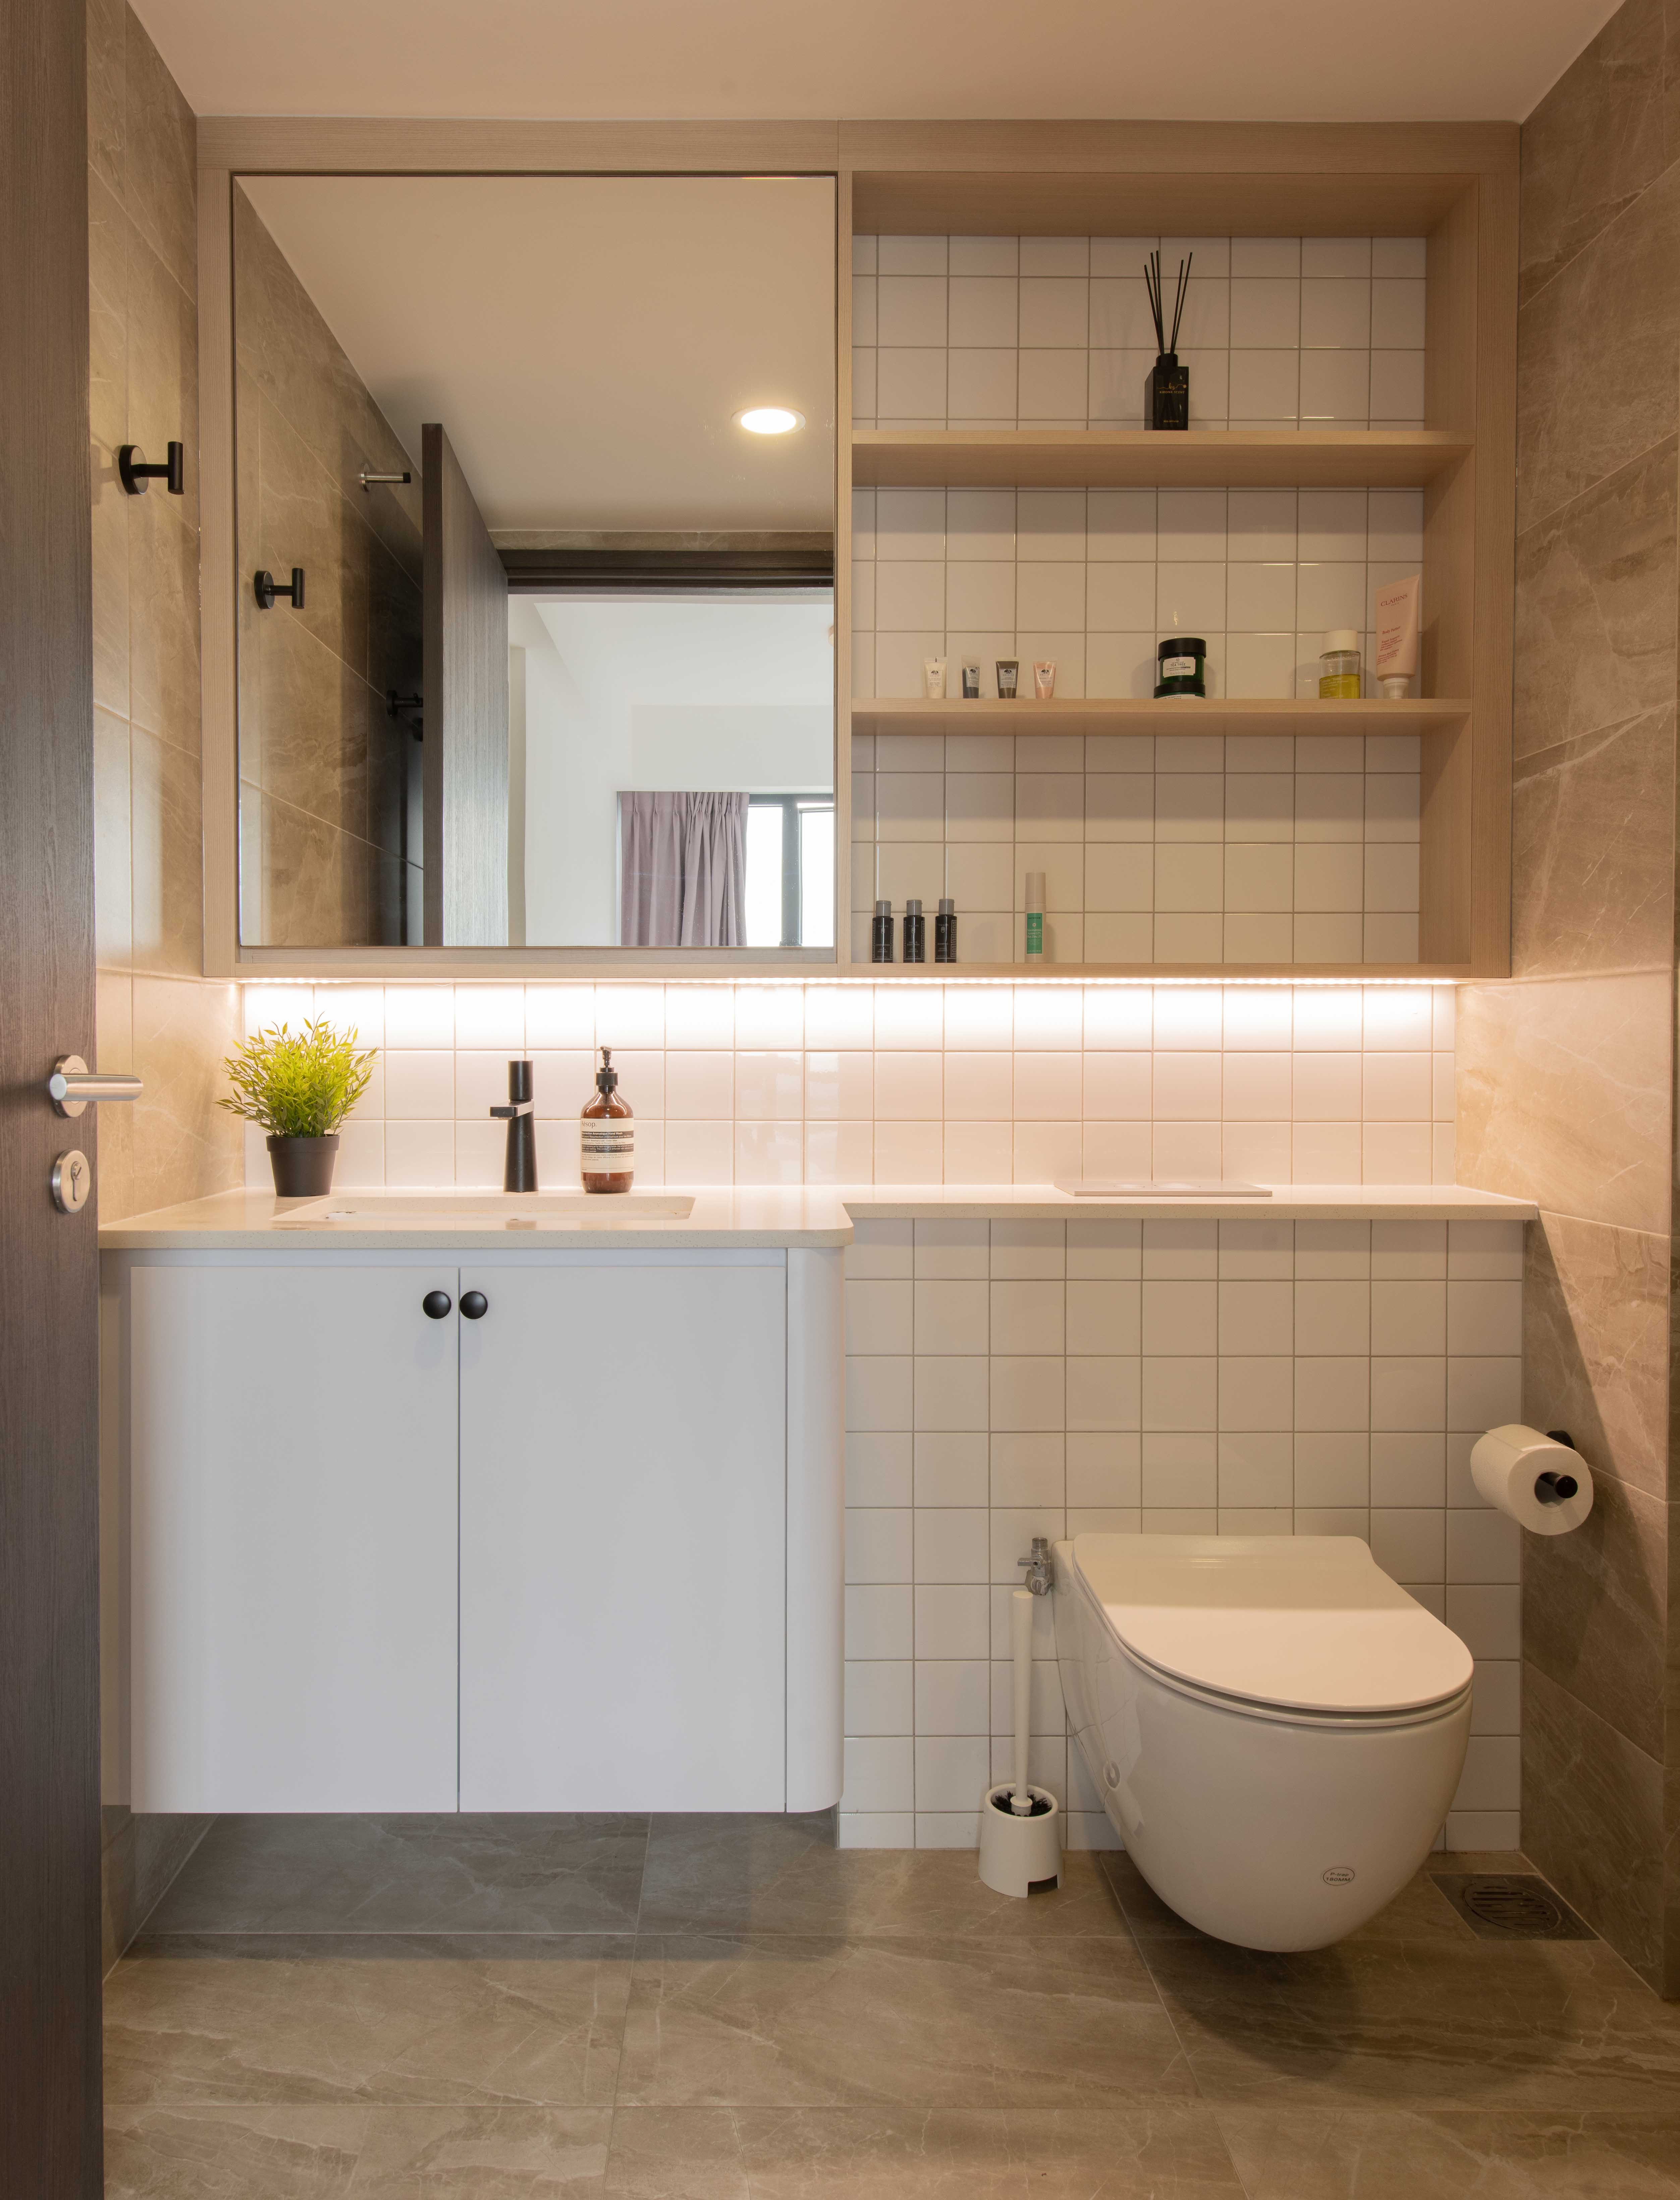 Think Big in a Tiny Space: Small Bathroom Ideas to Amp Up Your Design Game